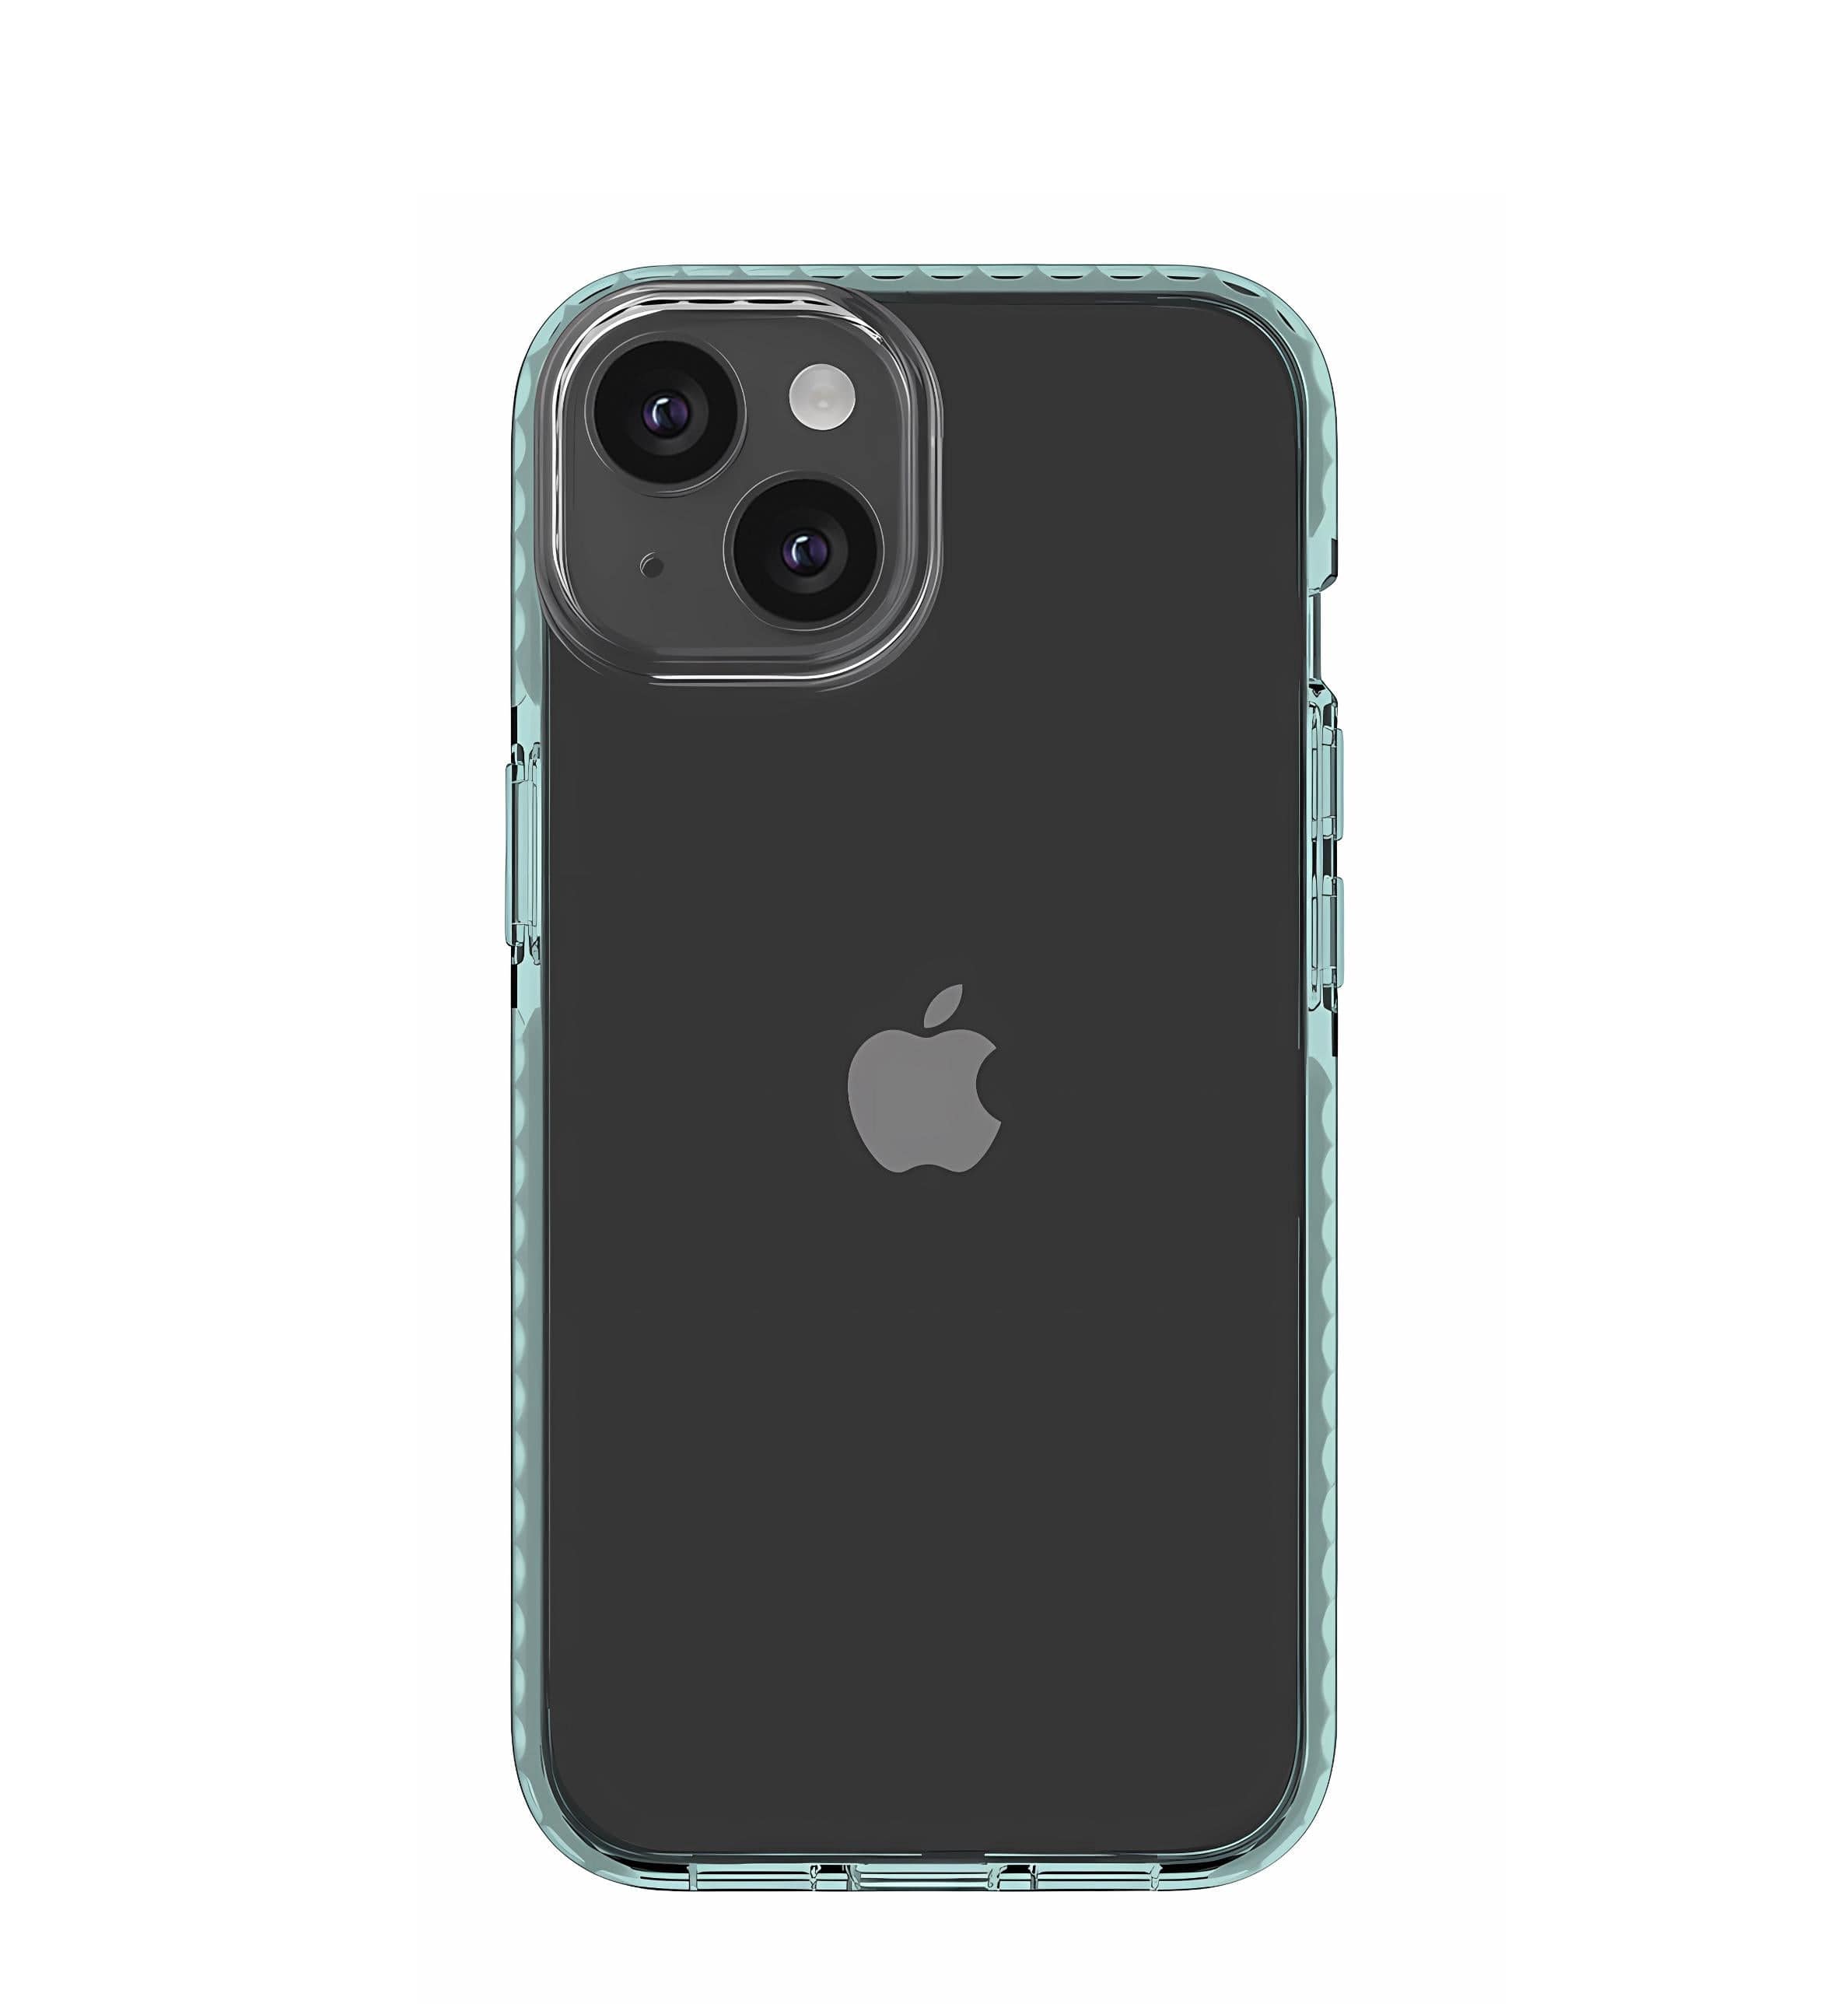 Crystal Clear iPhone Case - Teal